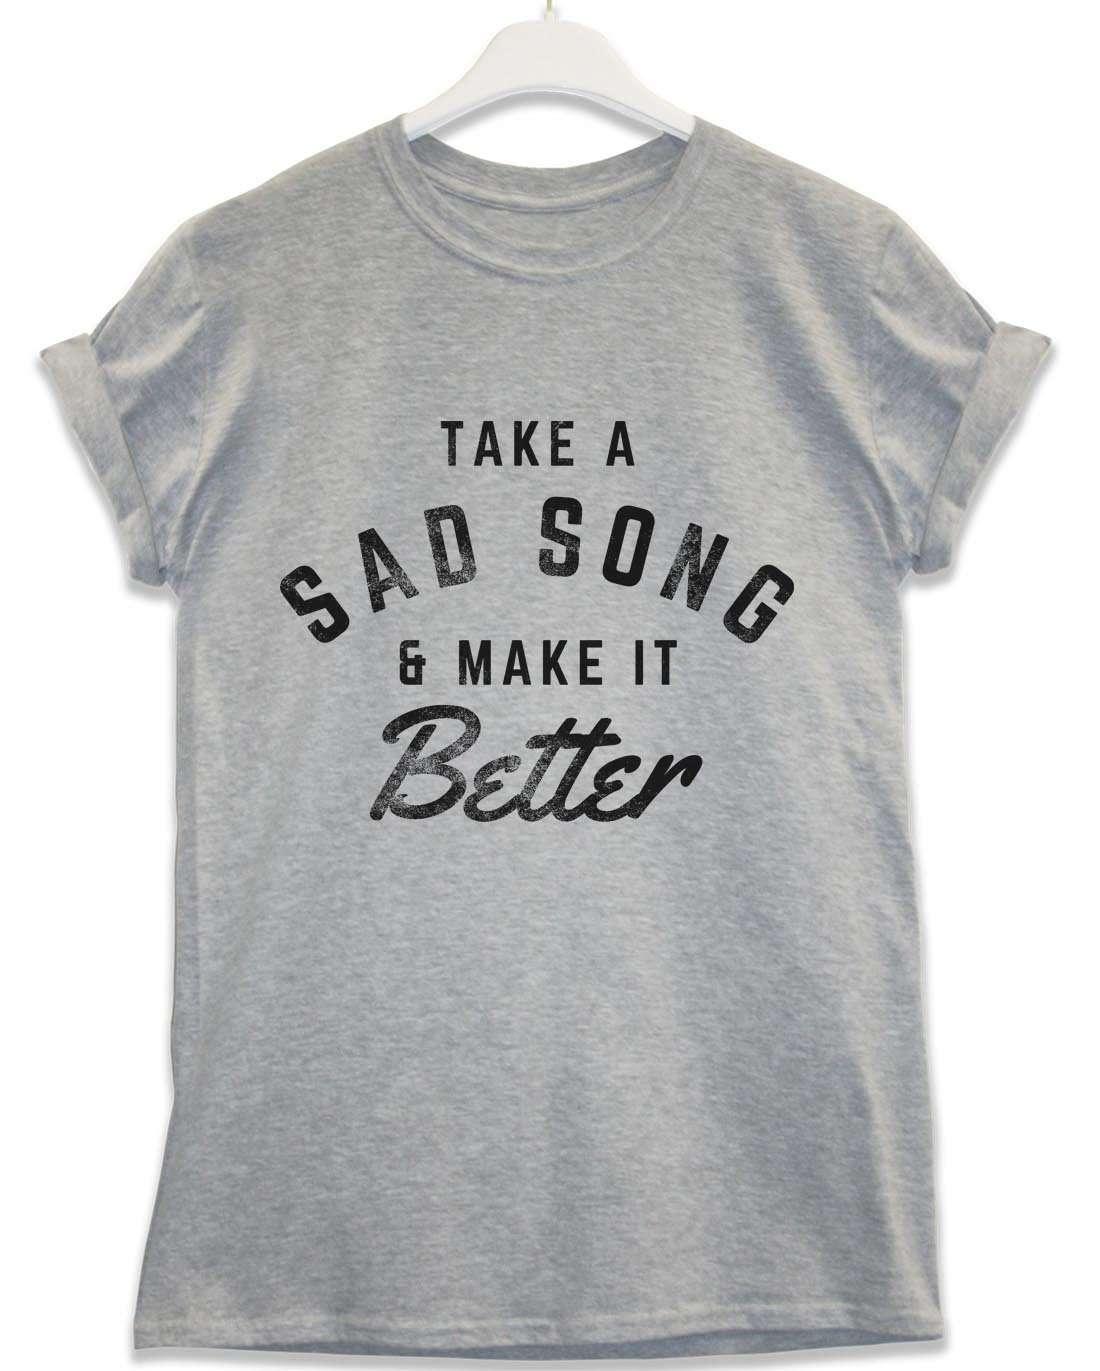 Take a Sad Song and Make it Better Lyric Quote T-Shirt For Men 8Ball